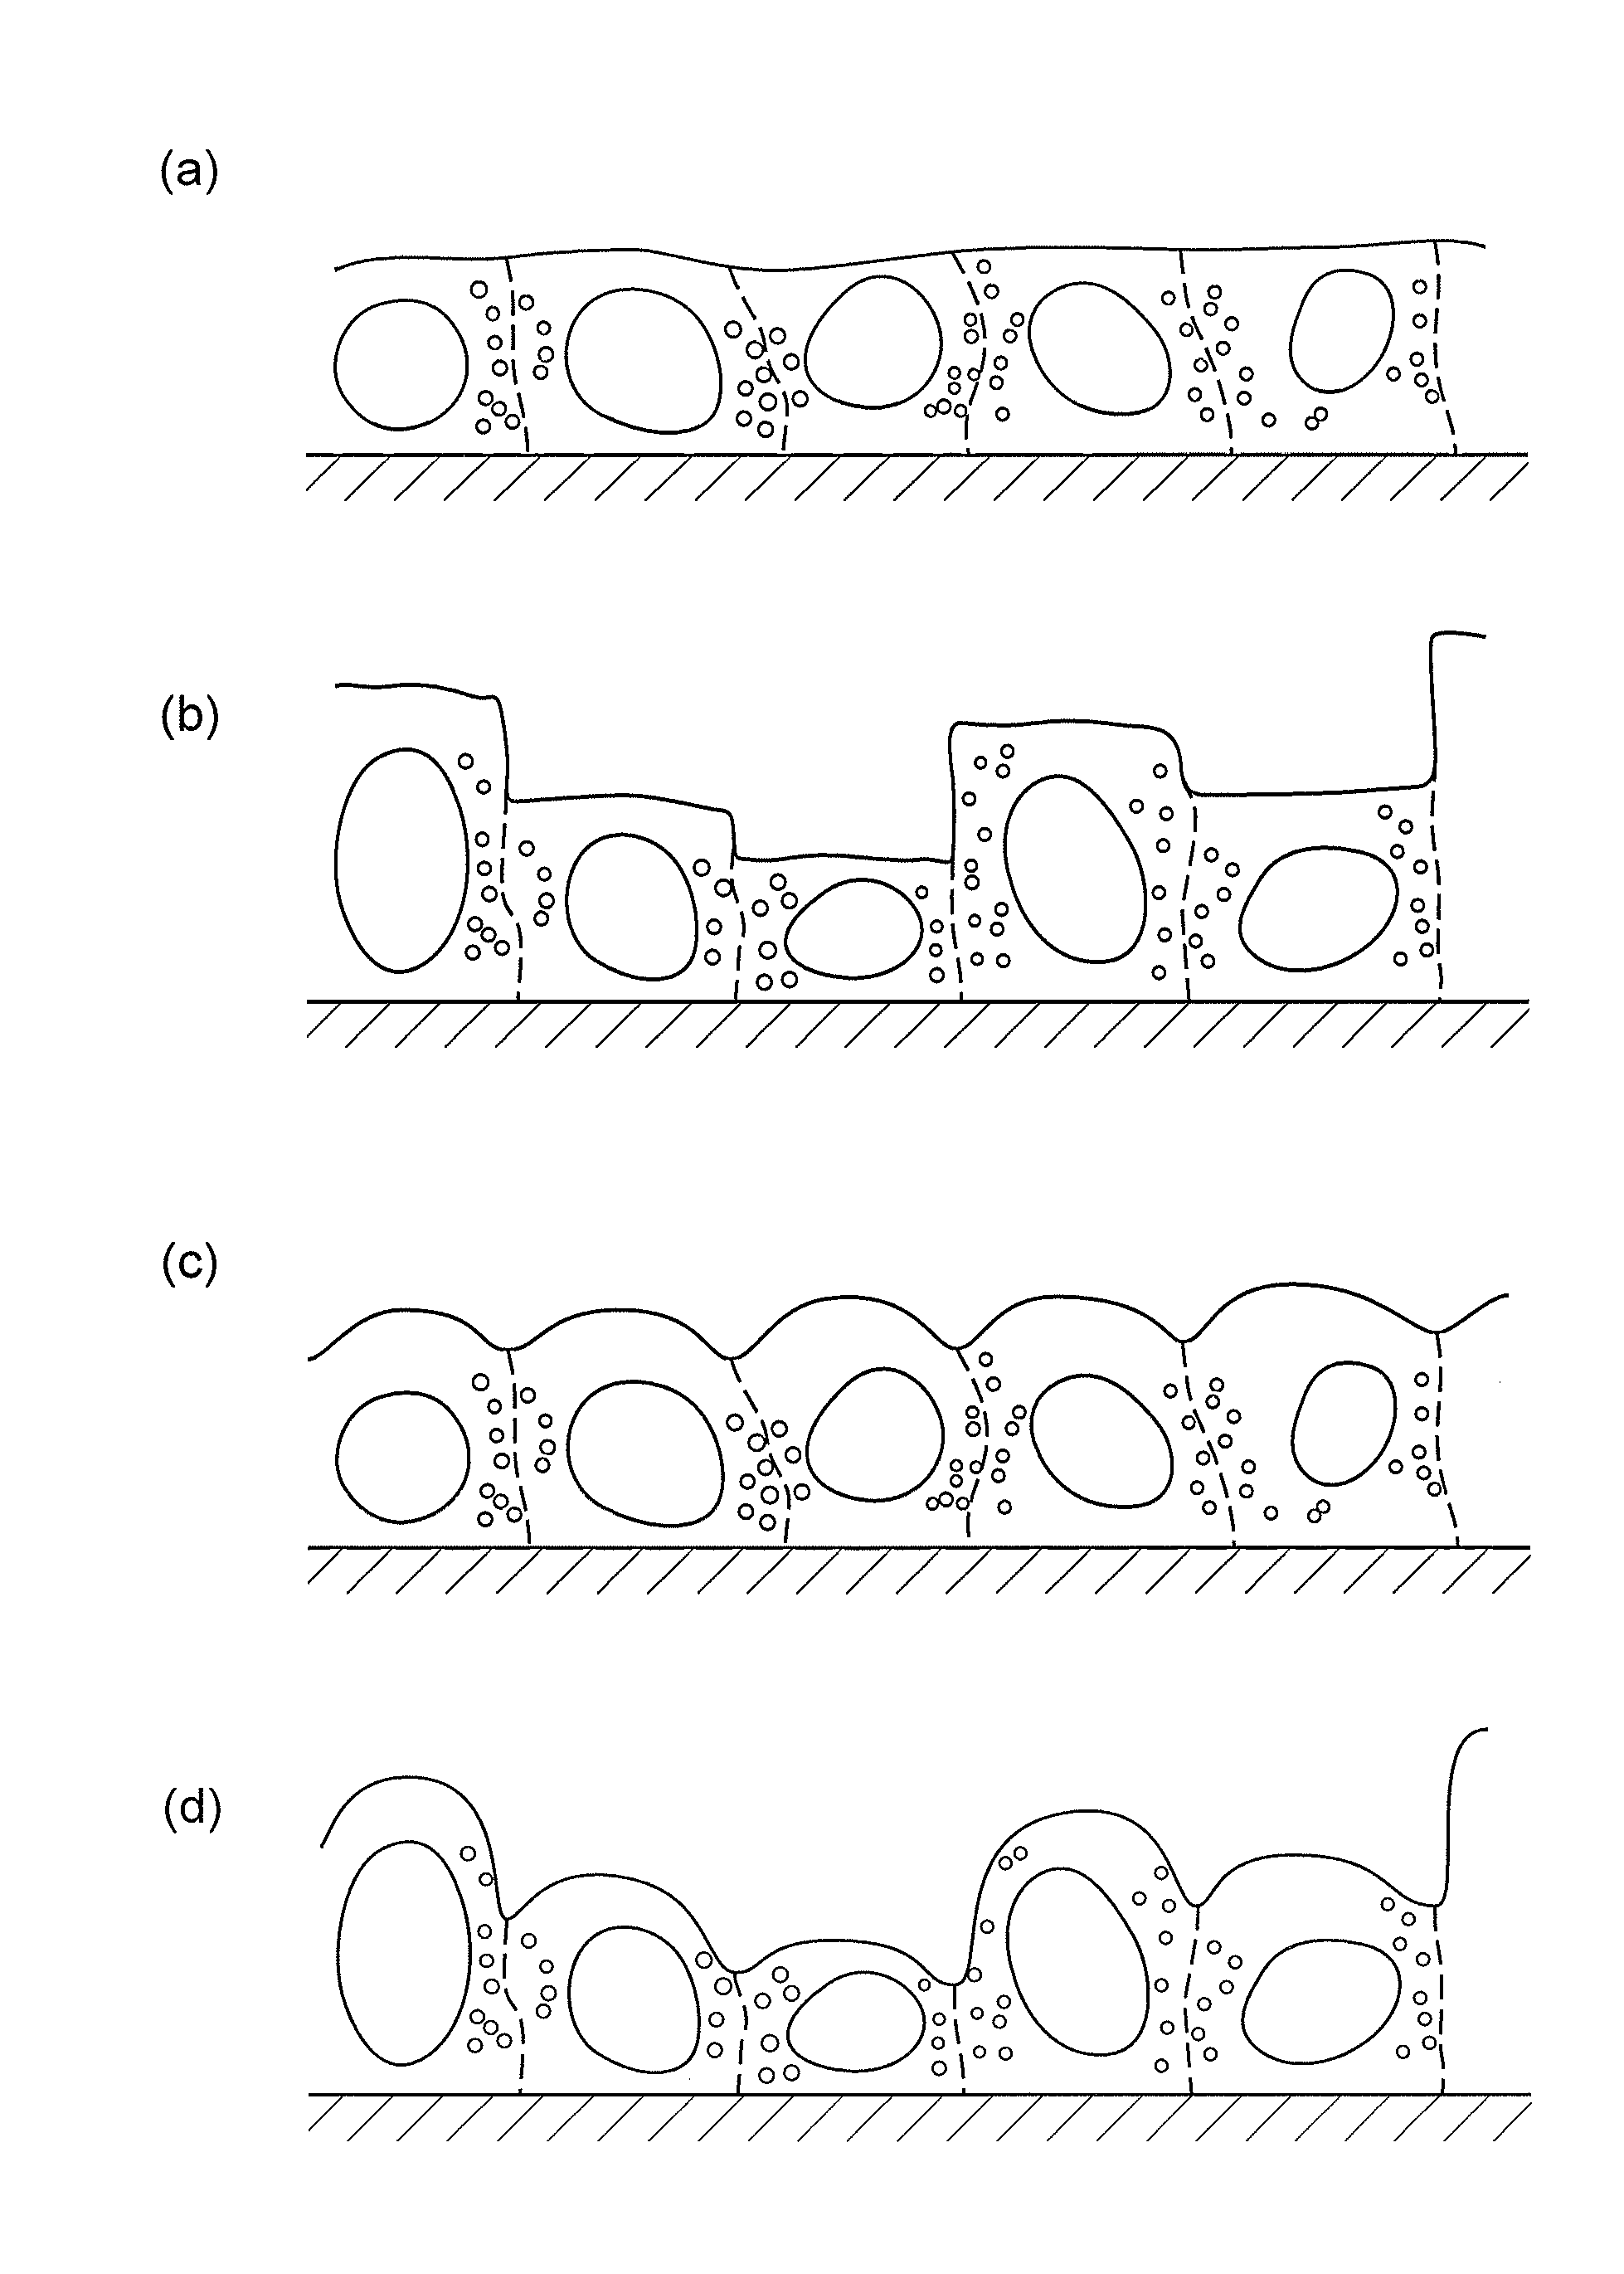 Method for determining differentiation level of pluripotent stem cells